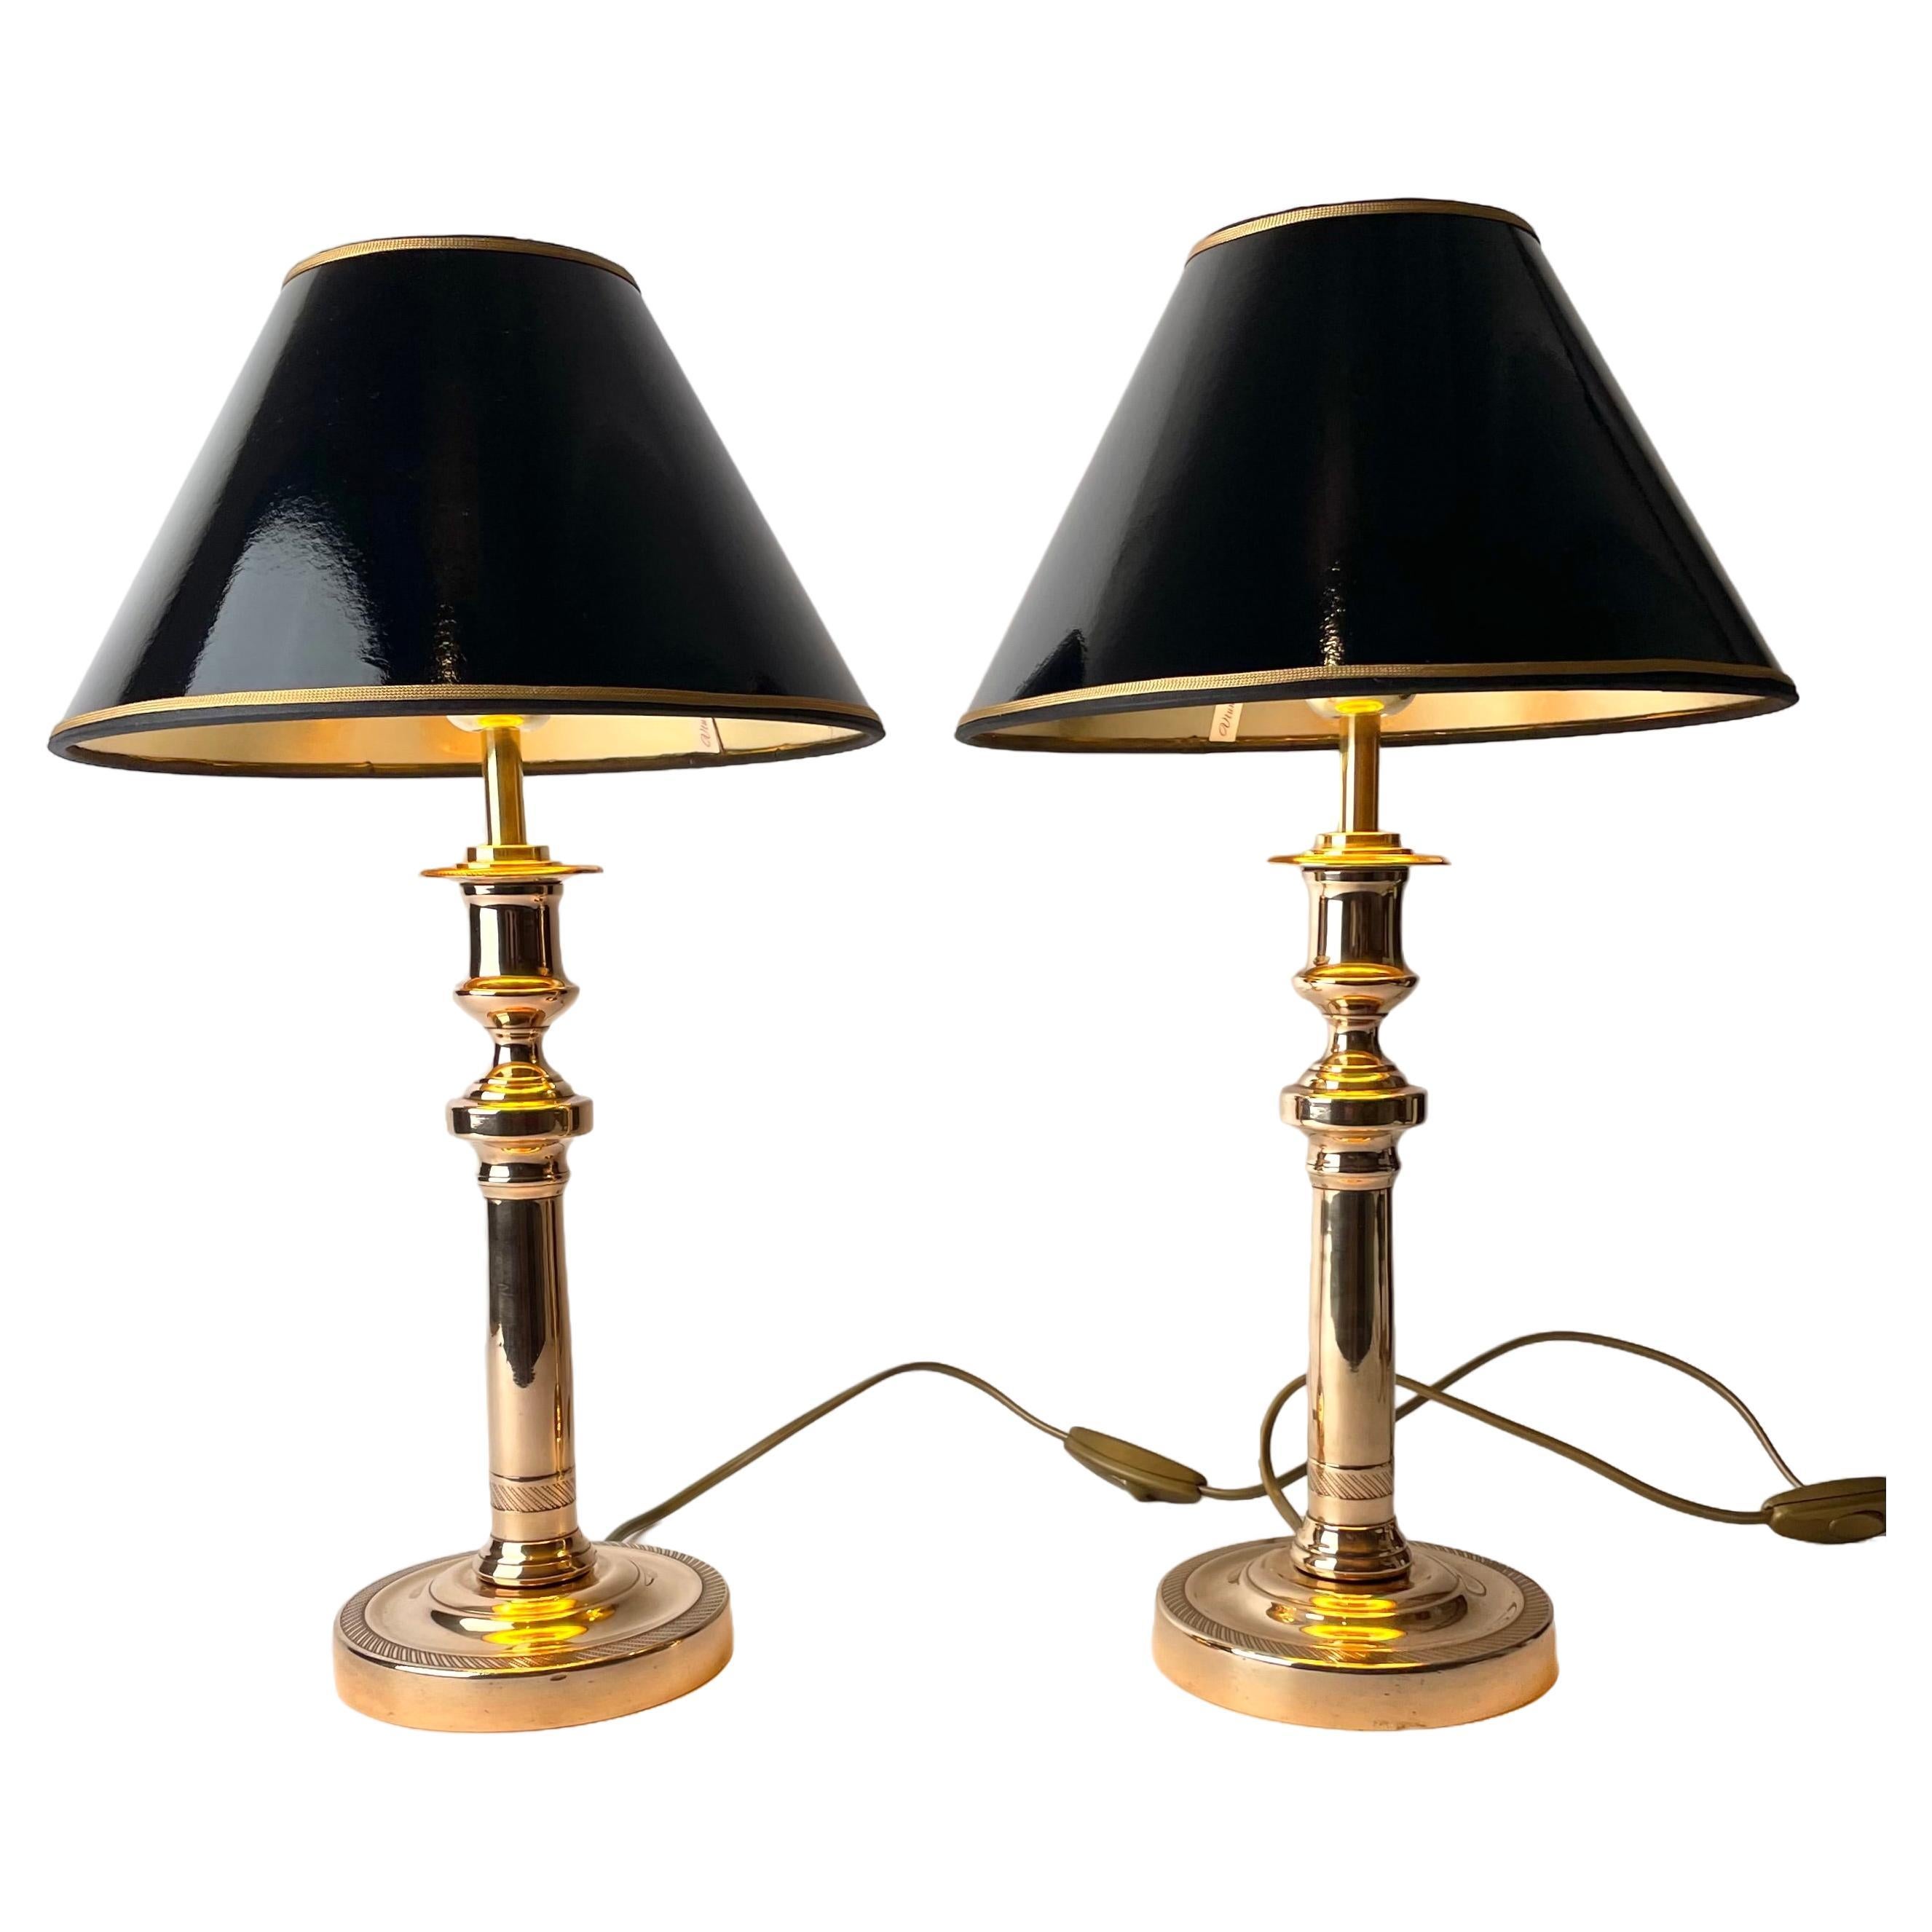 Beautiful pair of Empire Table Lamps, originally candlesticks from the 1820s